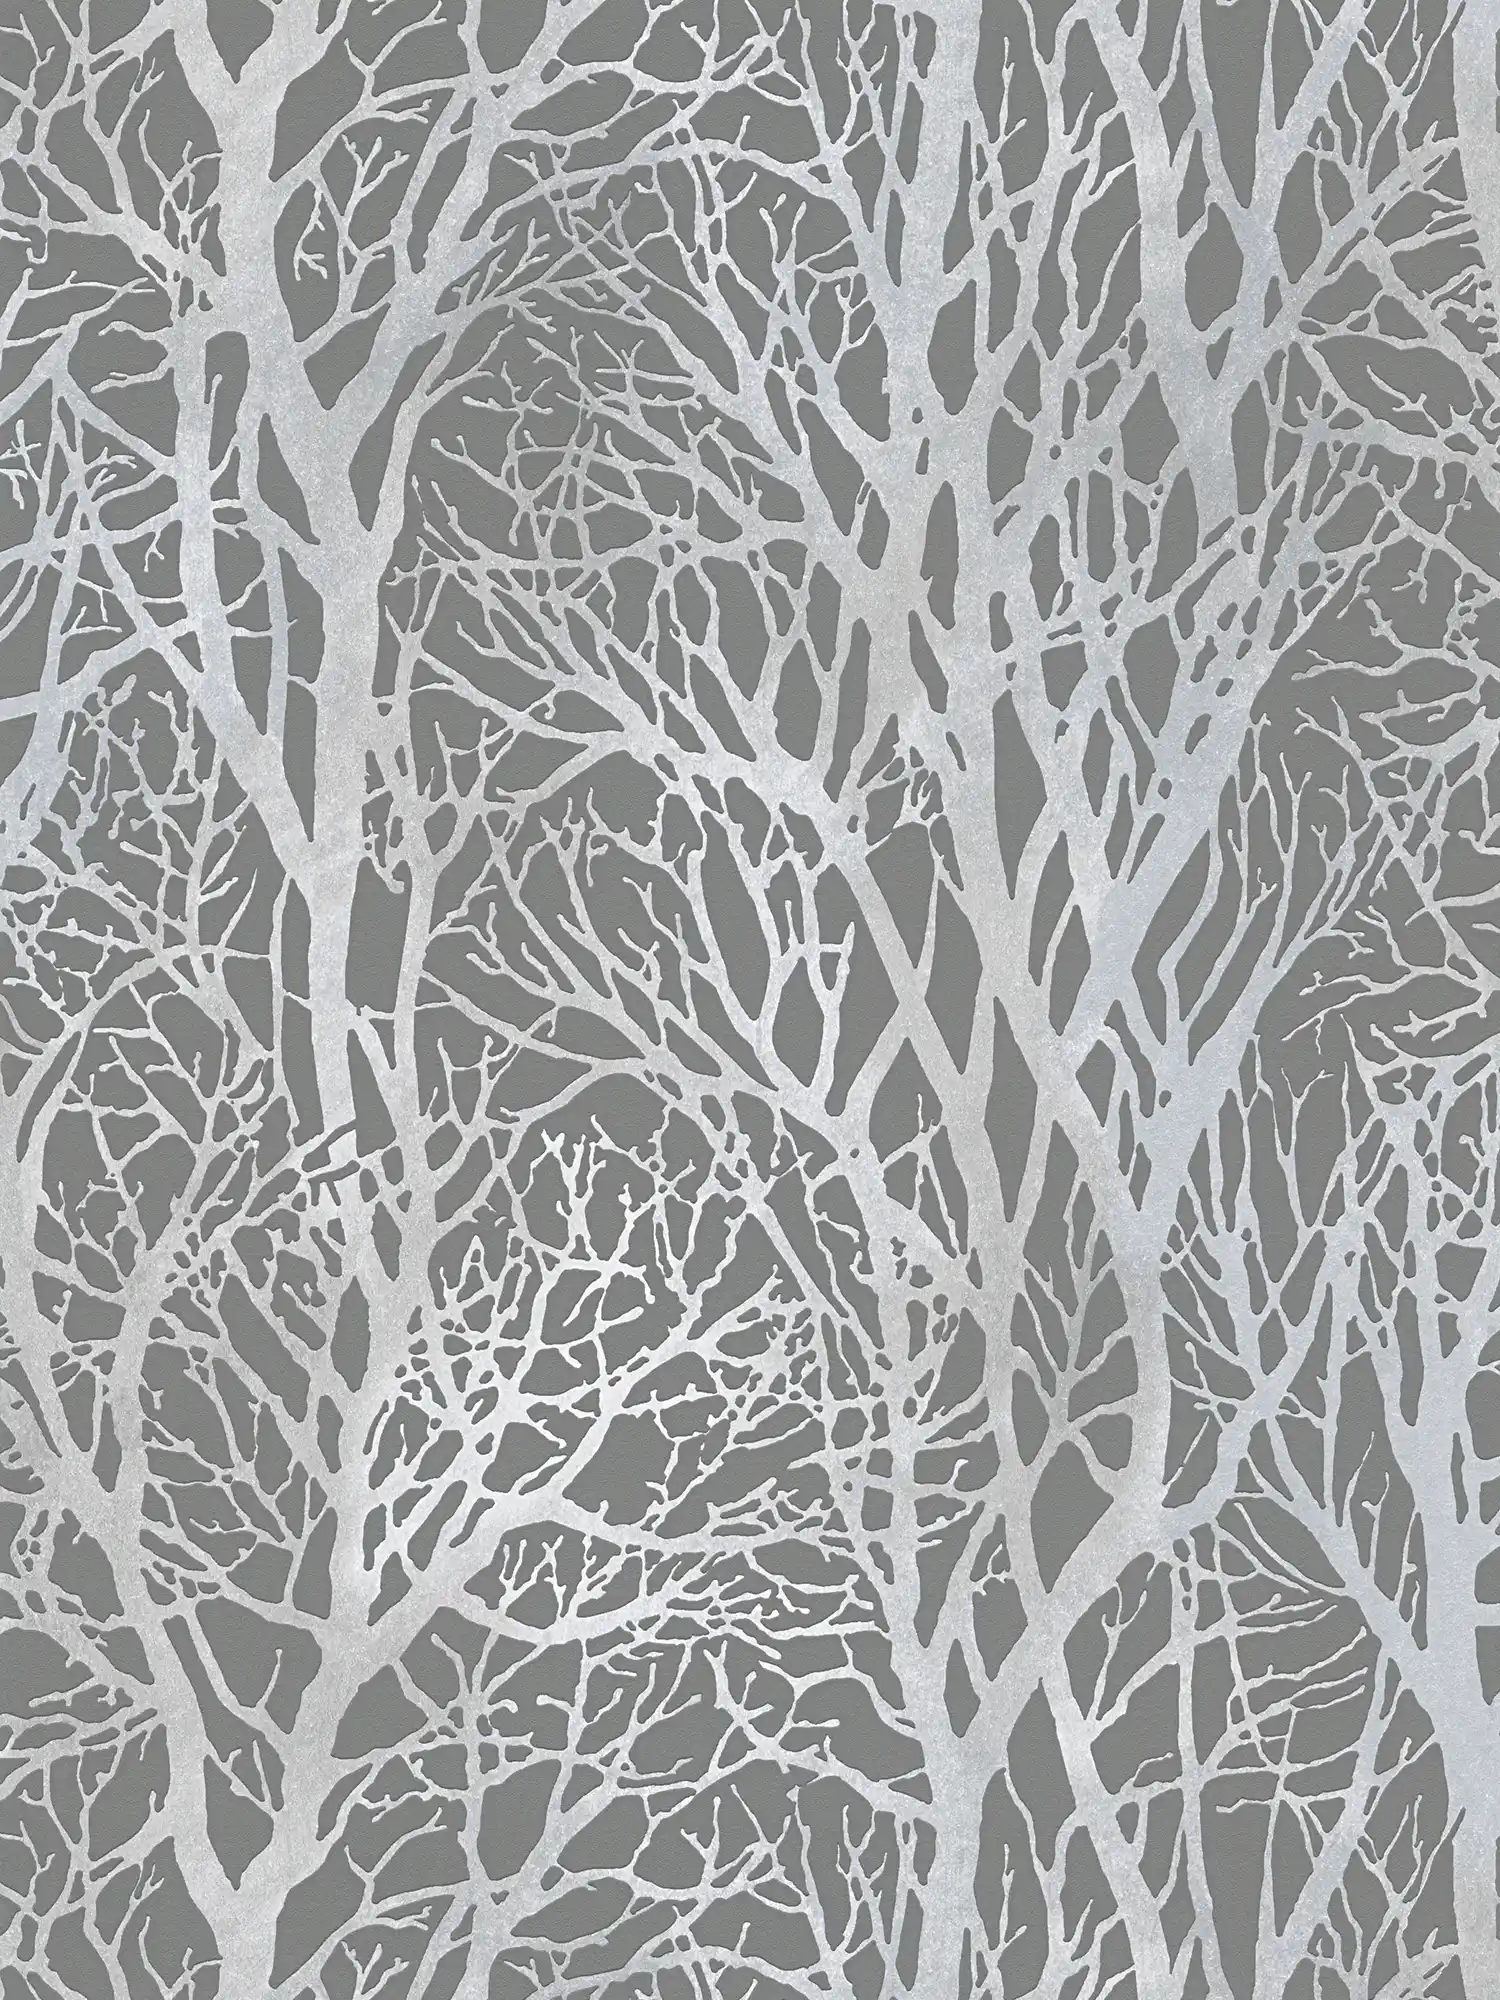 Anthracite wallpaper with branch motif & metallic effect - silver, grey
